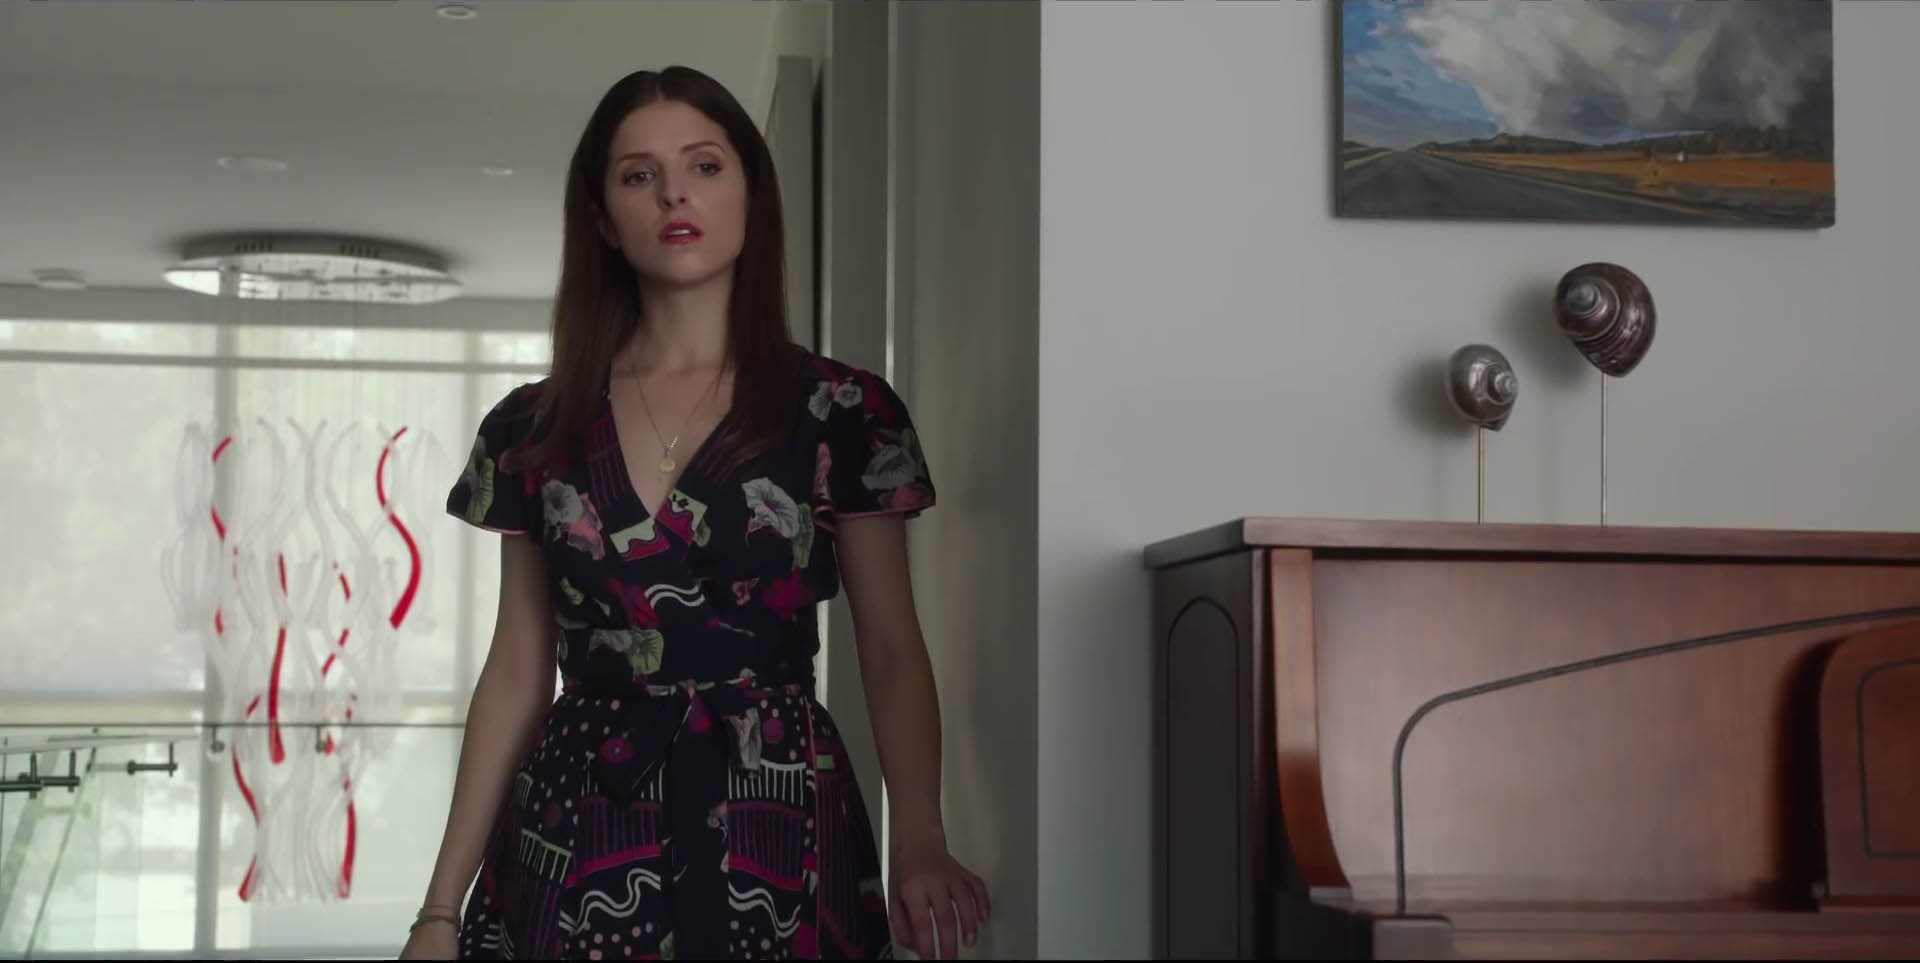 A Simple Favor Trailer - What Happened to Emily? | The Nerdy